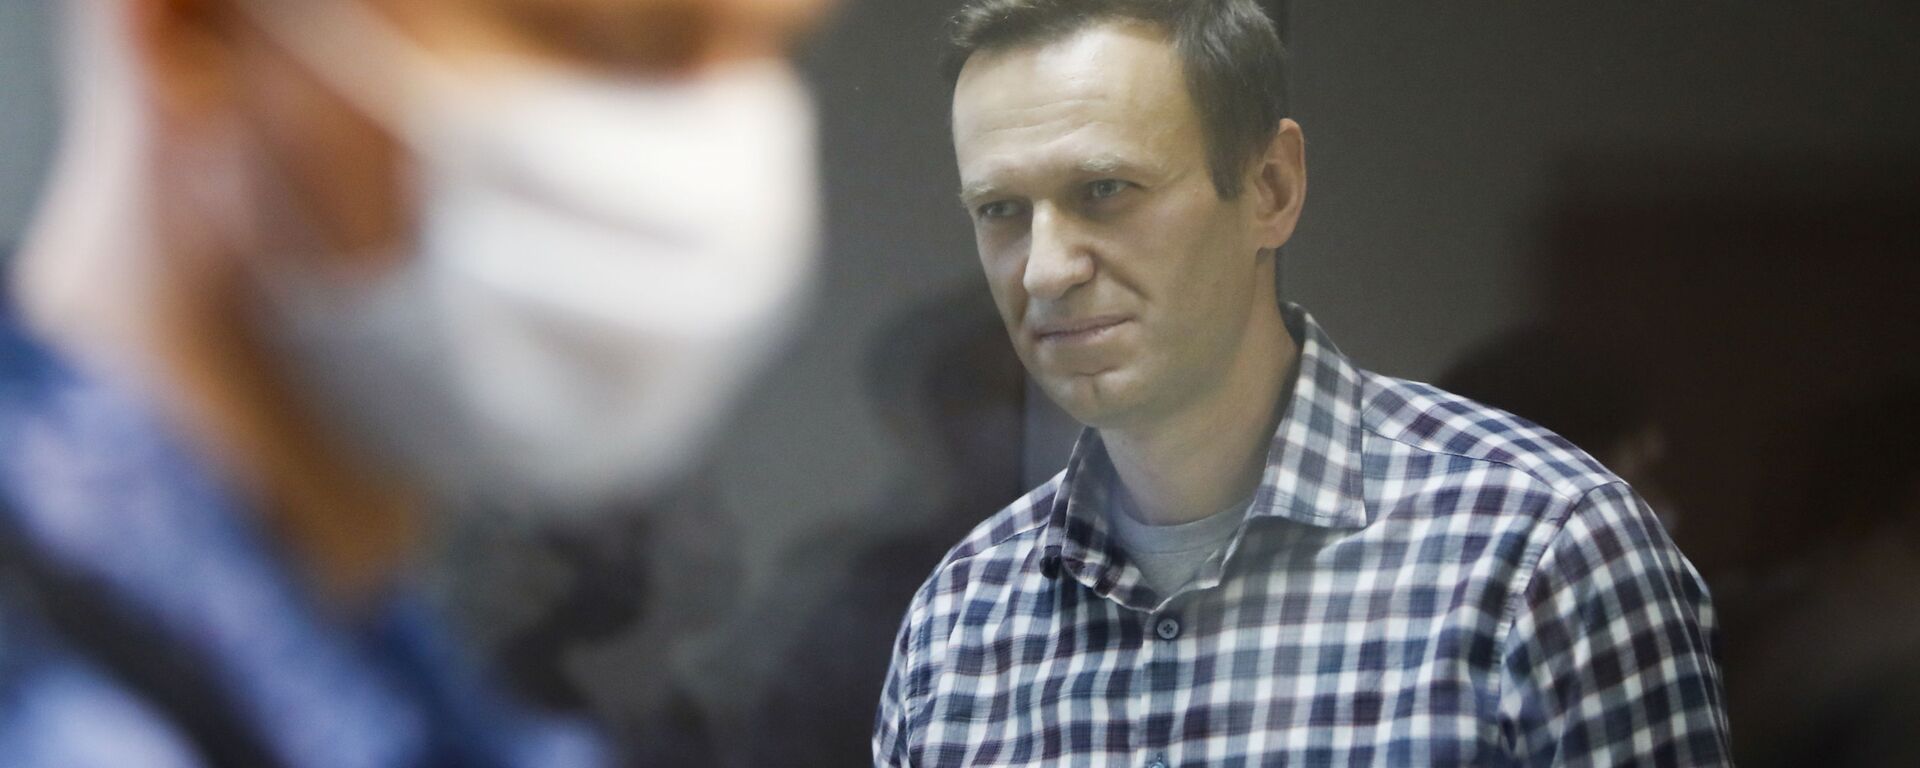 Russian opposition politician Alexei Navalny attends a hearing to consider an appeal against an earlier court decision to change his suspended sentence to a real prison term, in Moscow, Russia February 20, 2021. - Sputnik International, 1920, 19.10.2021